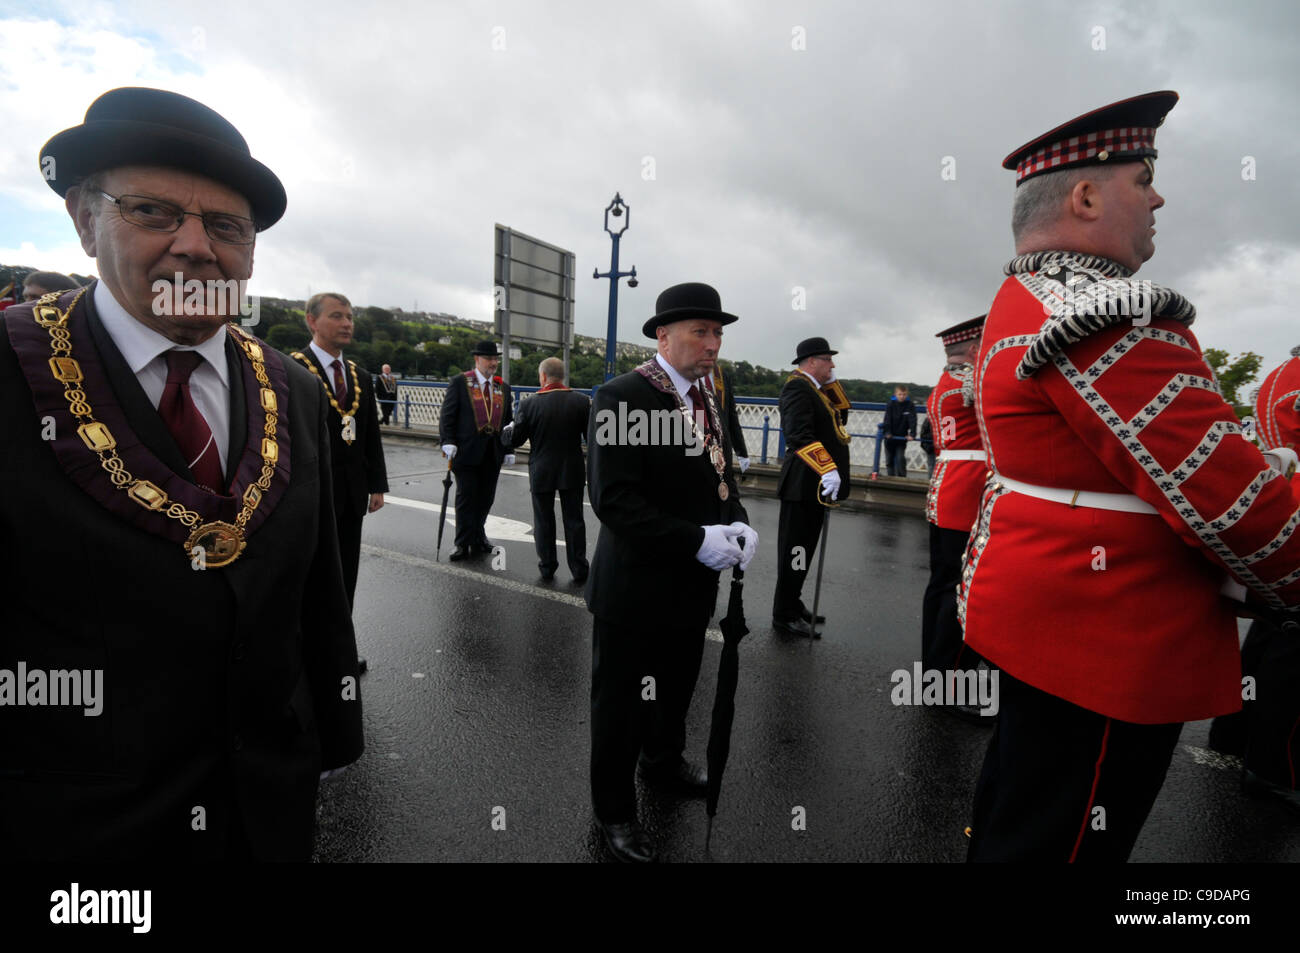 Members of the Apprentice Boys of Derry and bandsmen preparing to march in the annual parade in Londonderry, Northern Ireland. Stock Photo